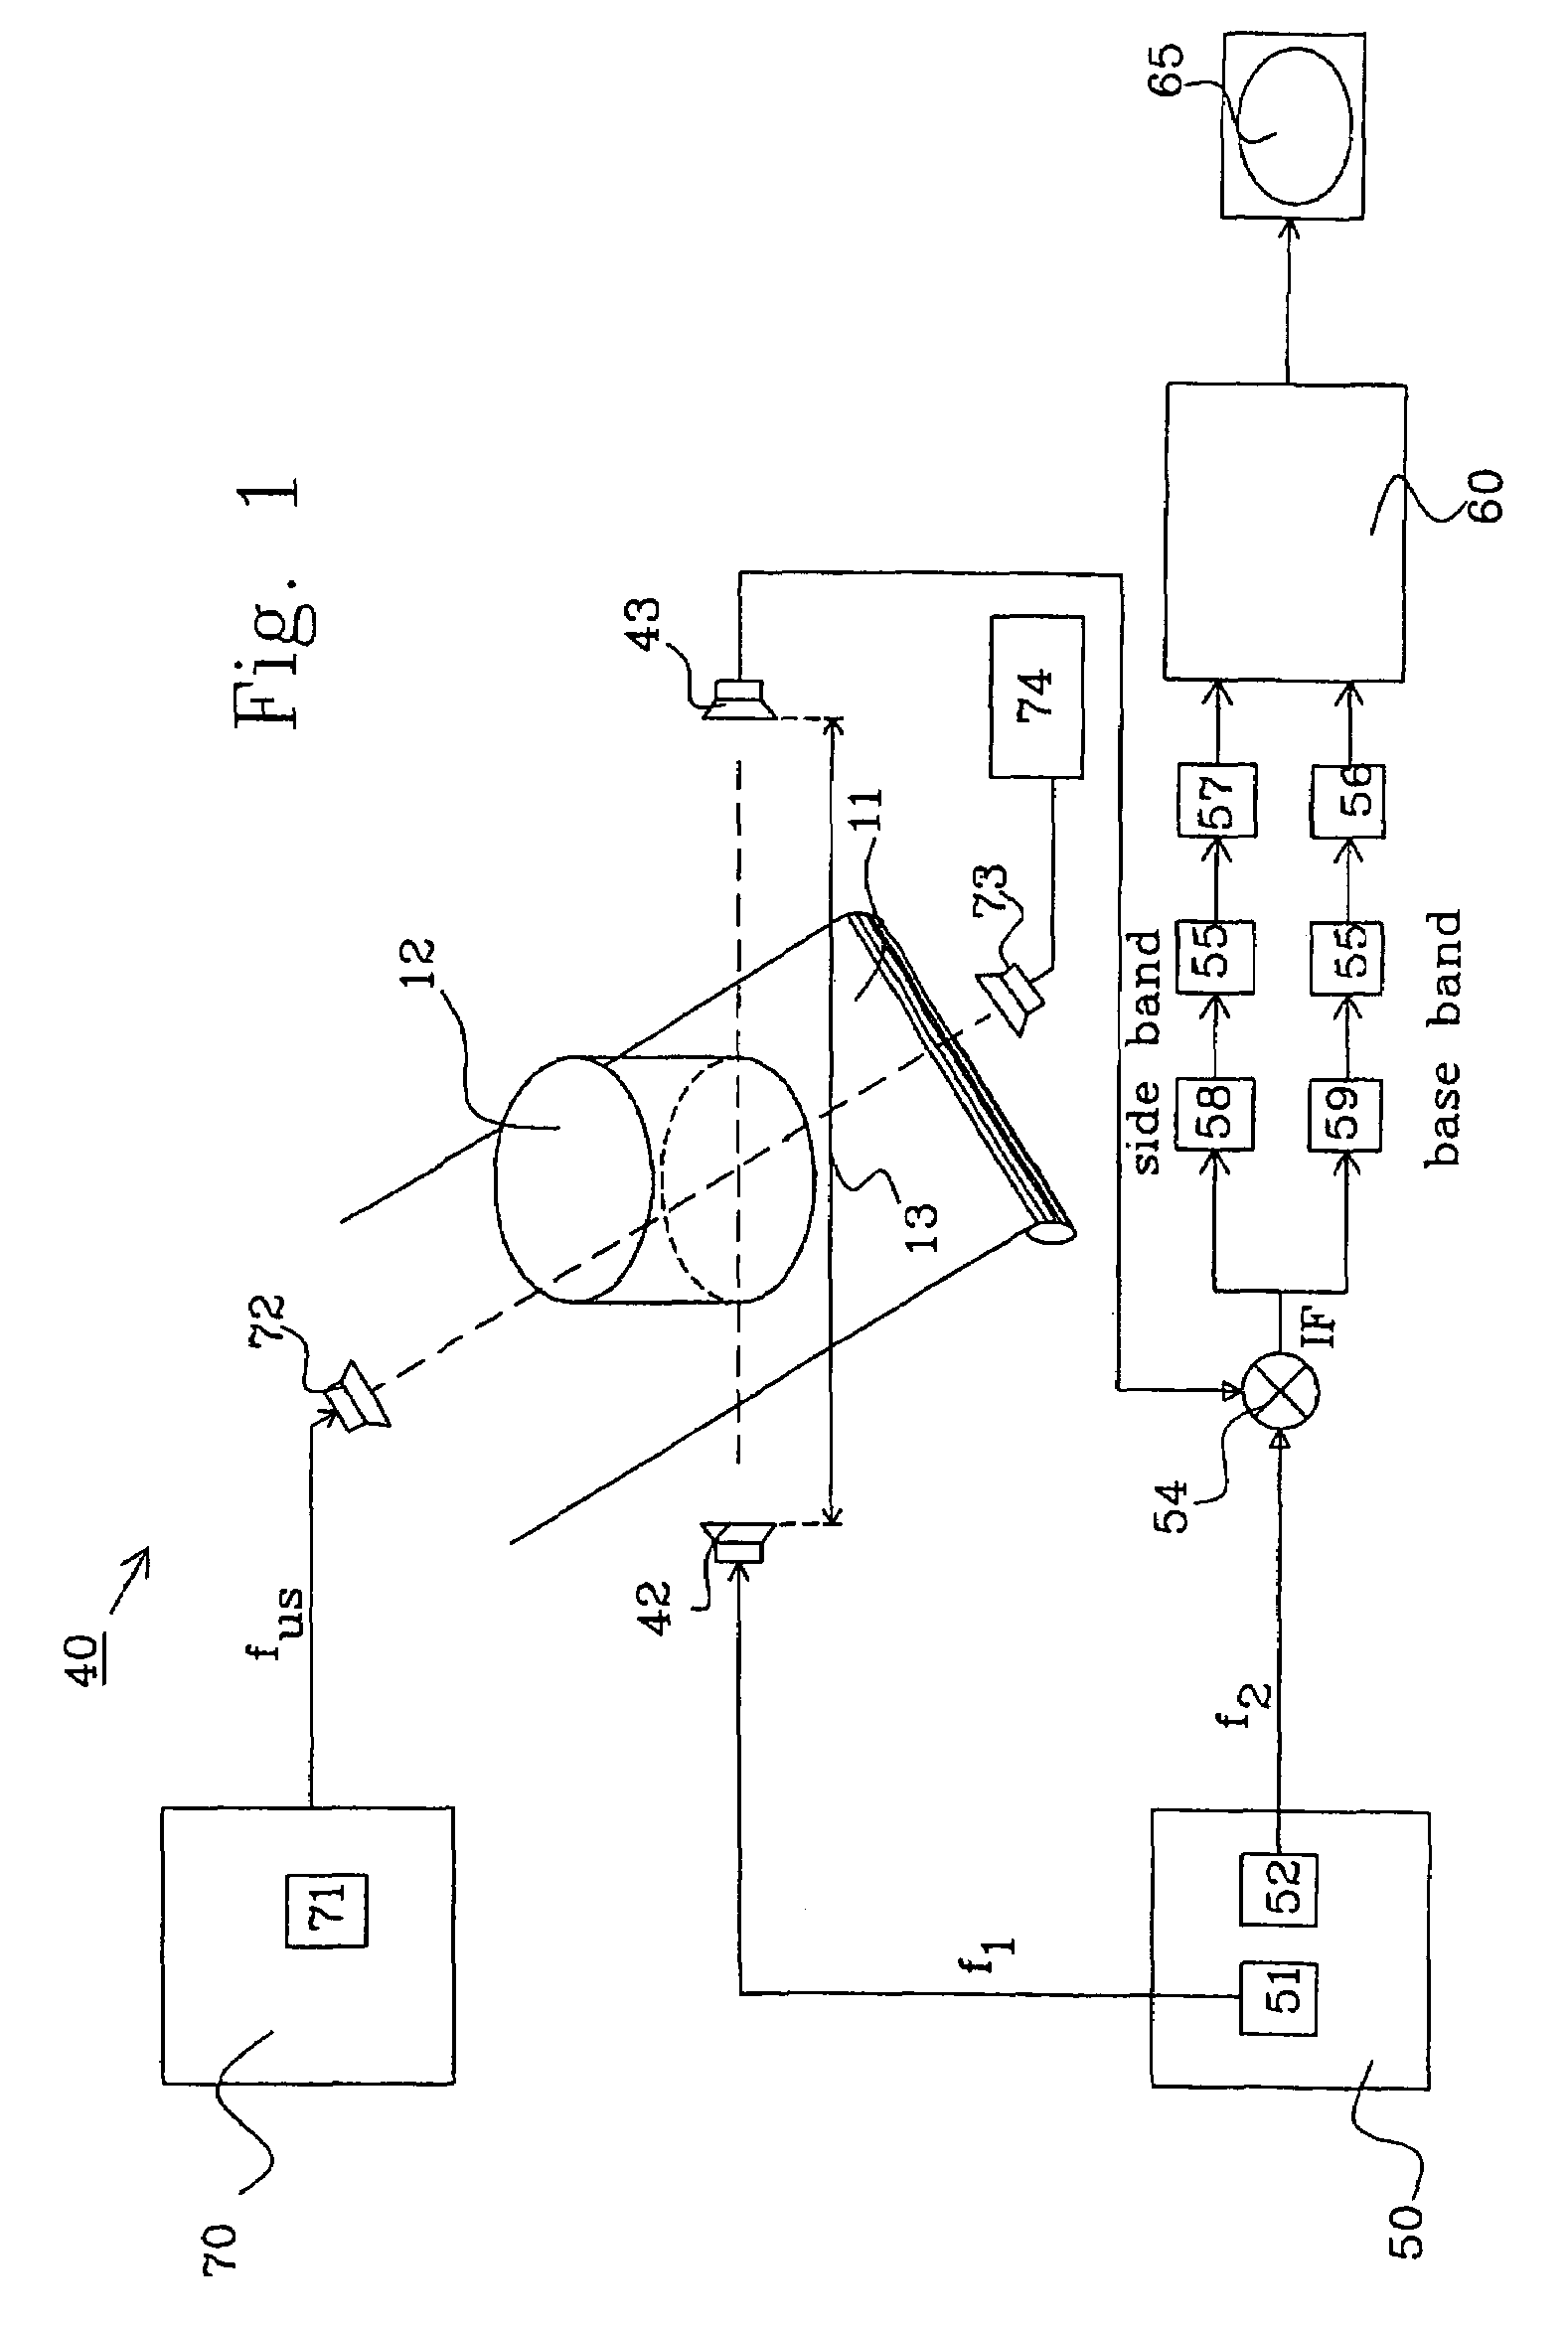 Method and system for determining process parameters